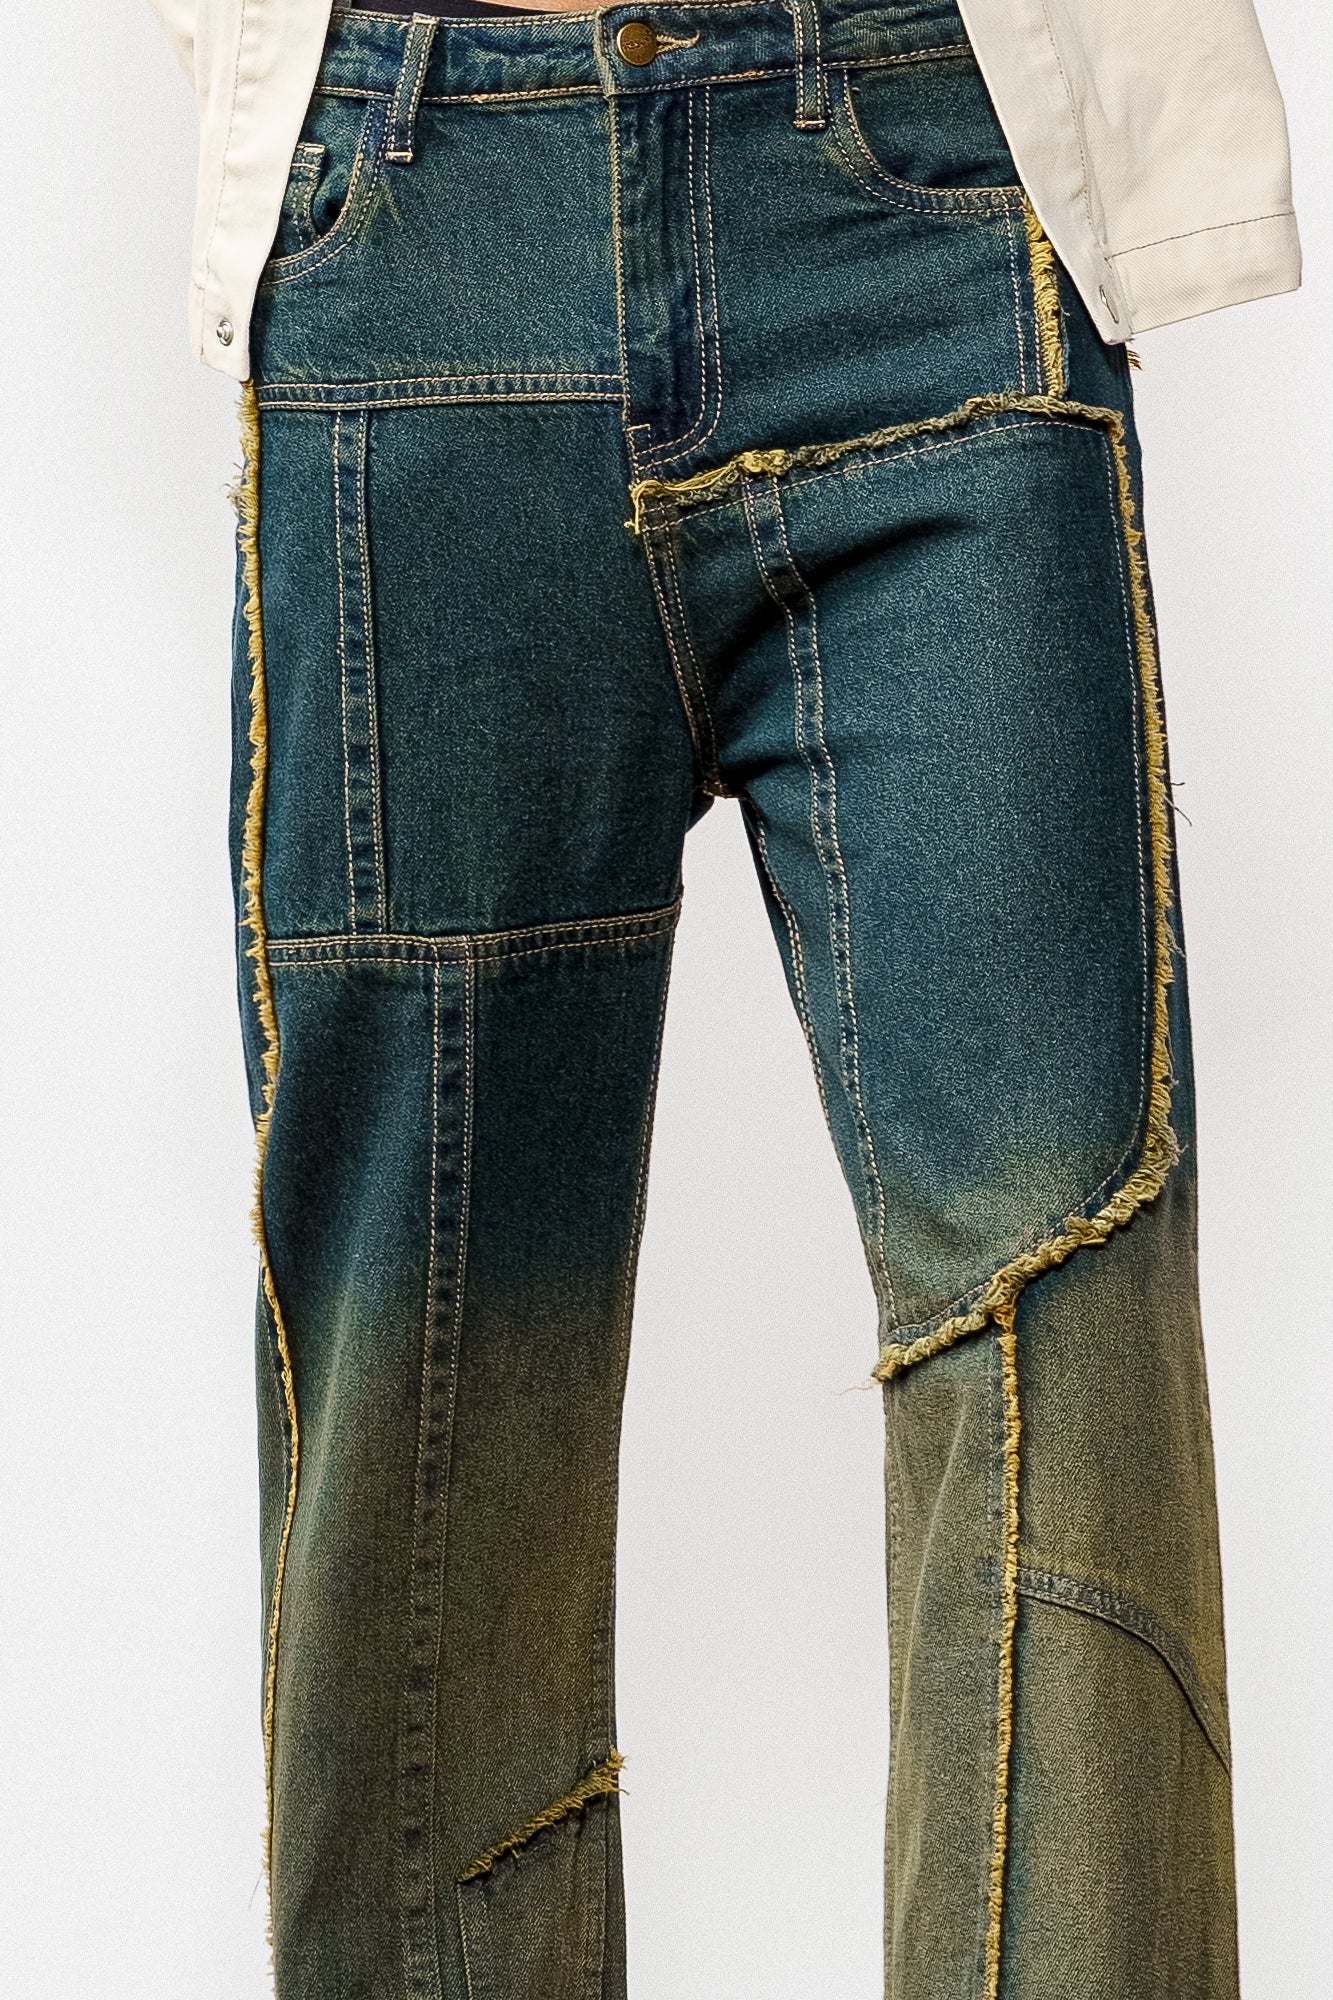 RUSTIC PANELLED MEN'S STRAIGHT JEANS